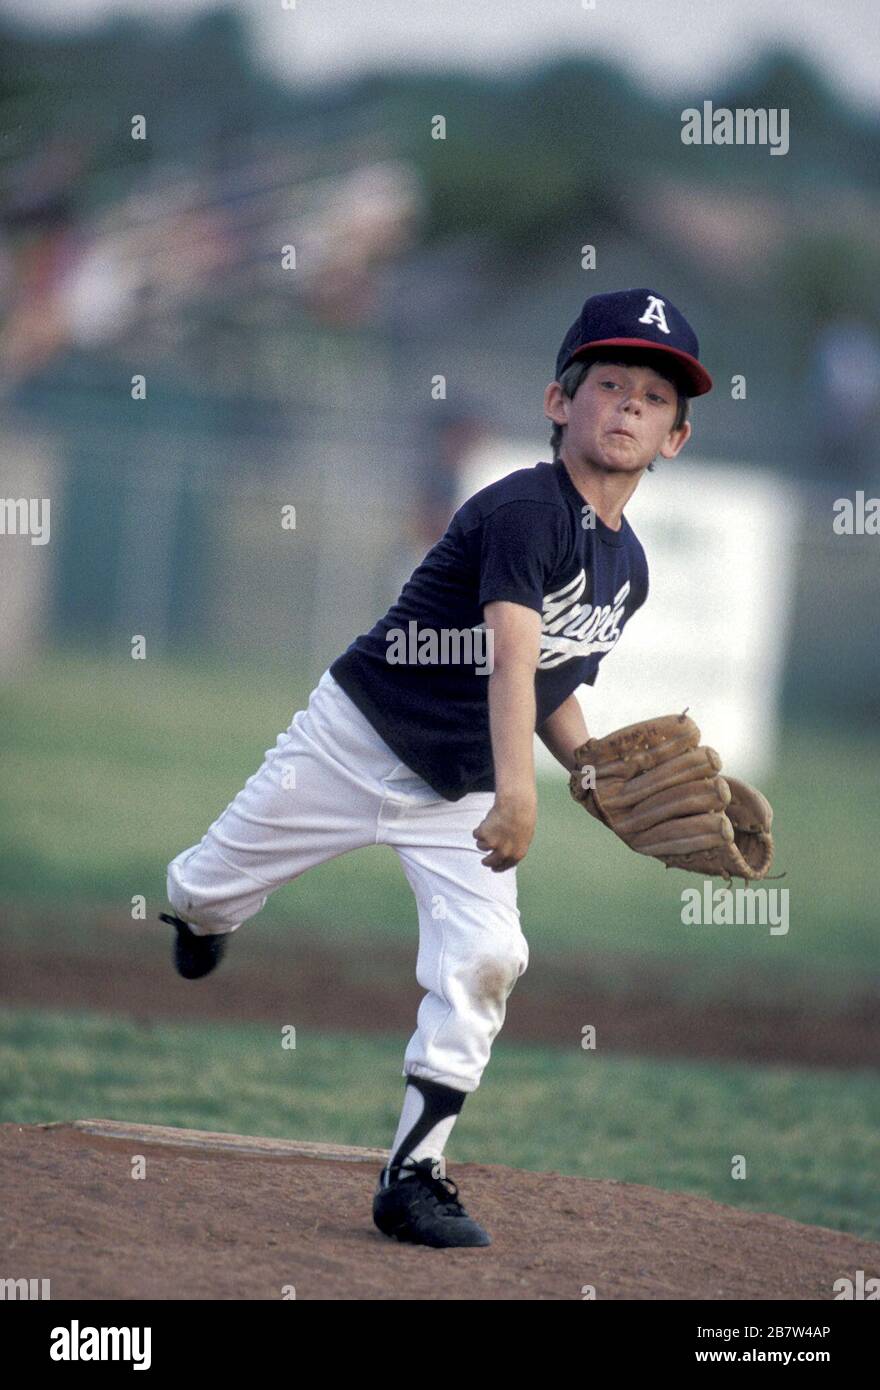 Austin, Texas USA: Young boy pitches during youth league baseball game for 9-11-year-old boys. MR ©Bob Daemmrich Stock Photo